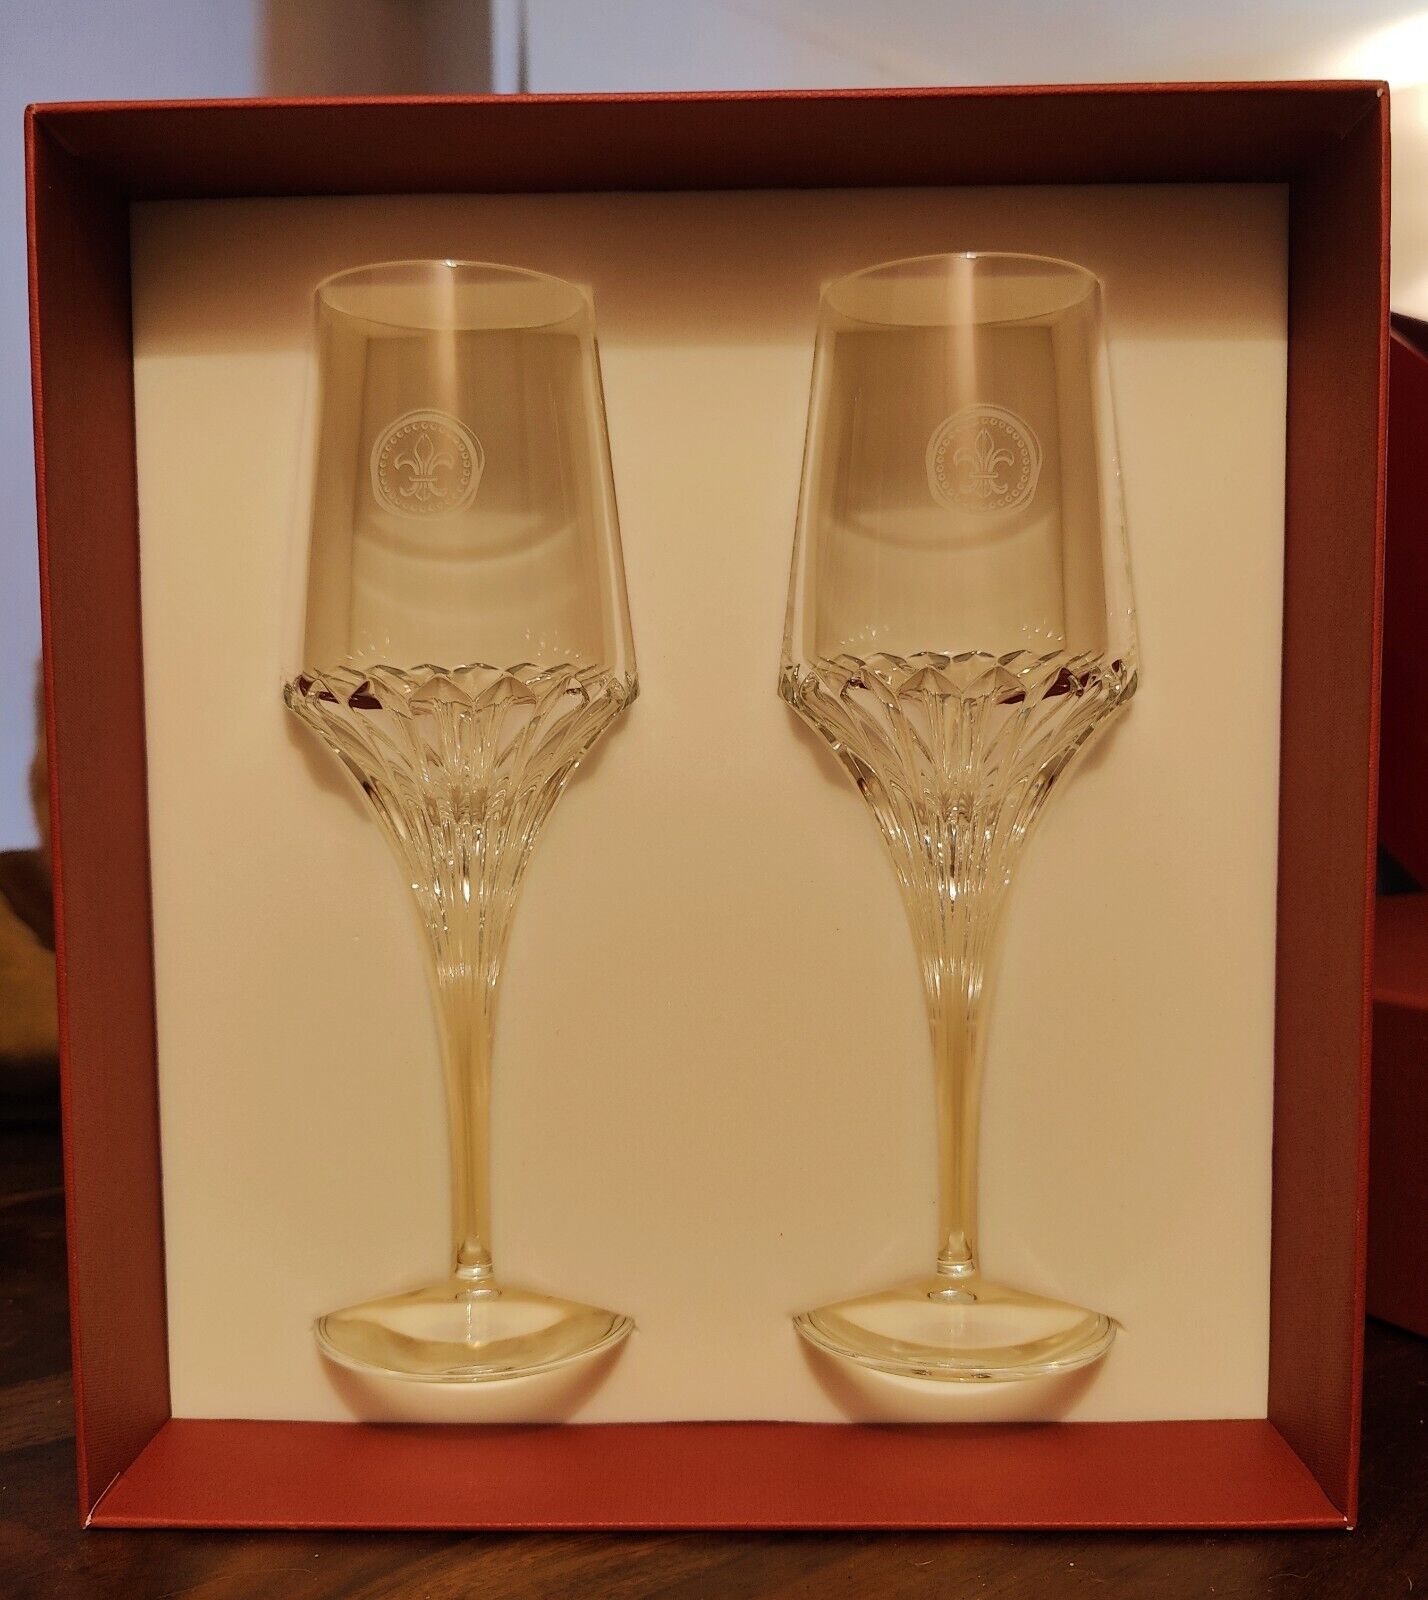 2 x REMY MARTIN LOUIS XIII CHRISTOPHE PILLET CRYSTAL GLASSES